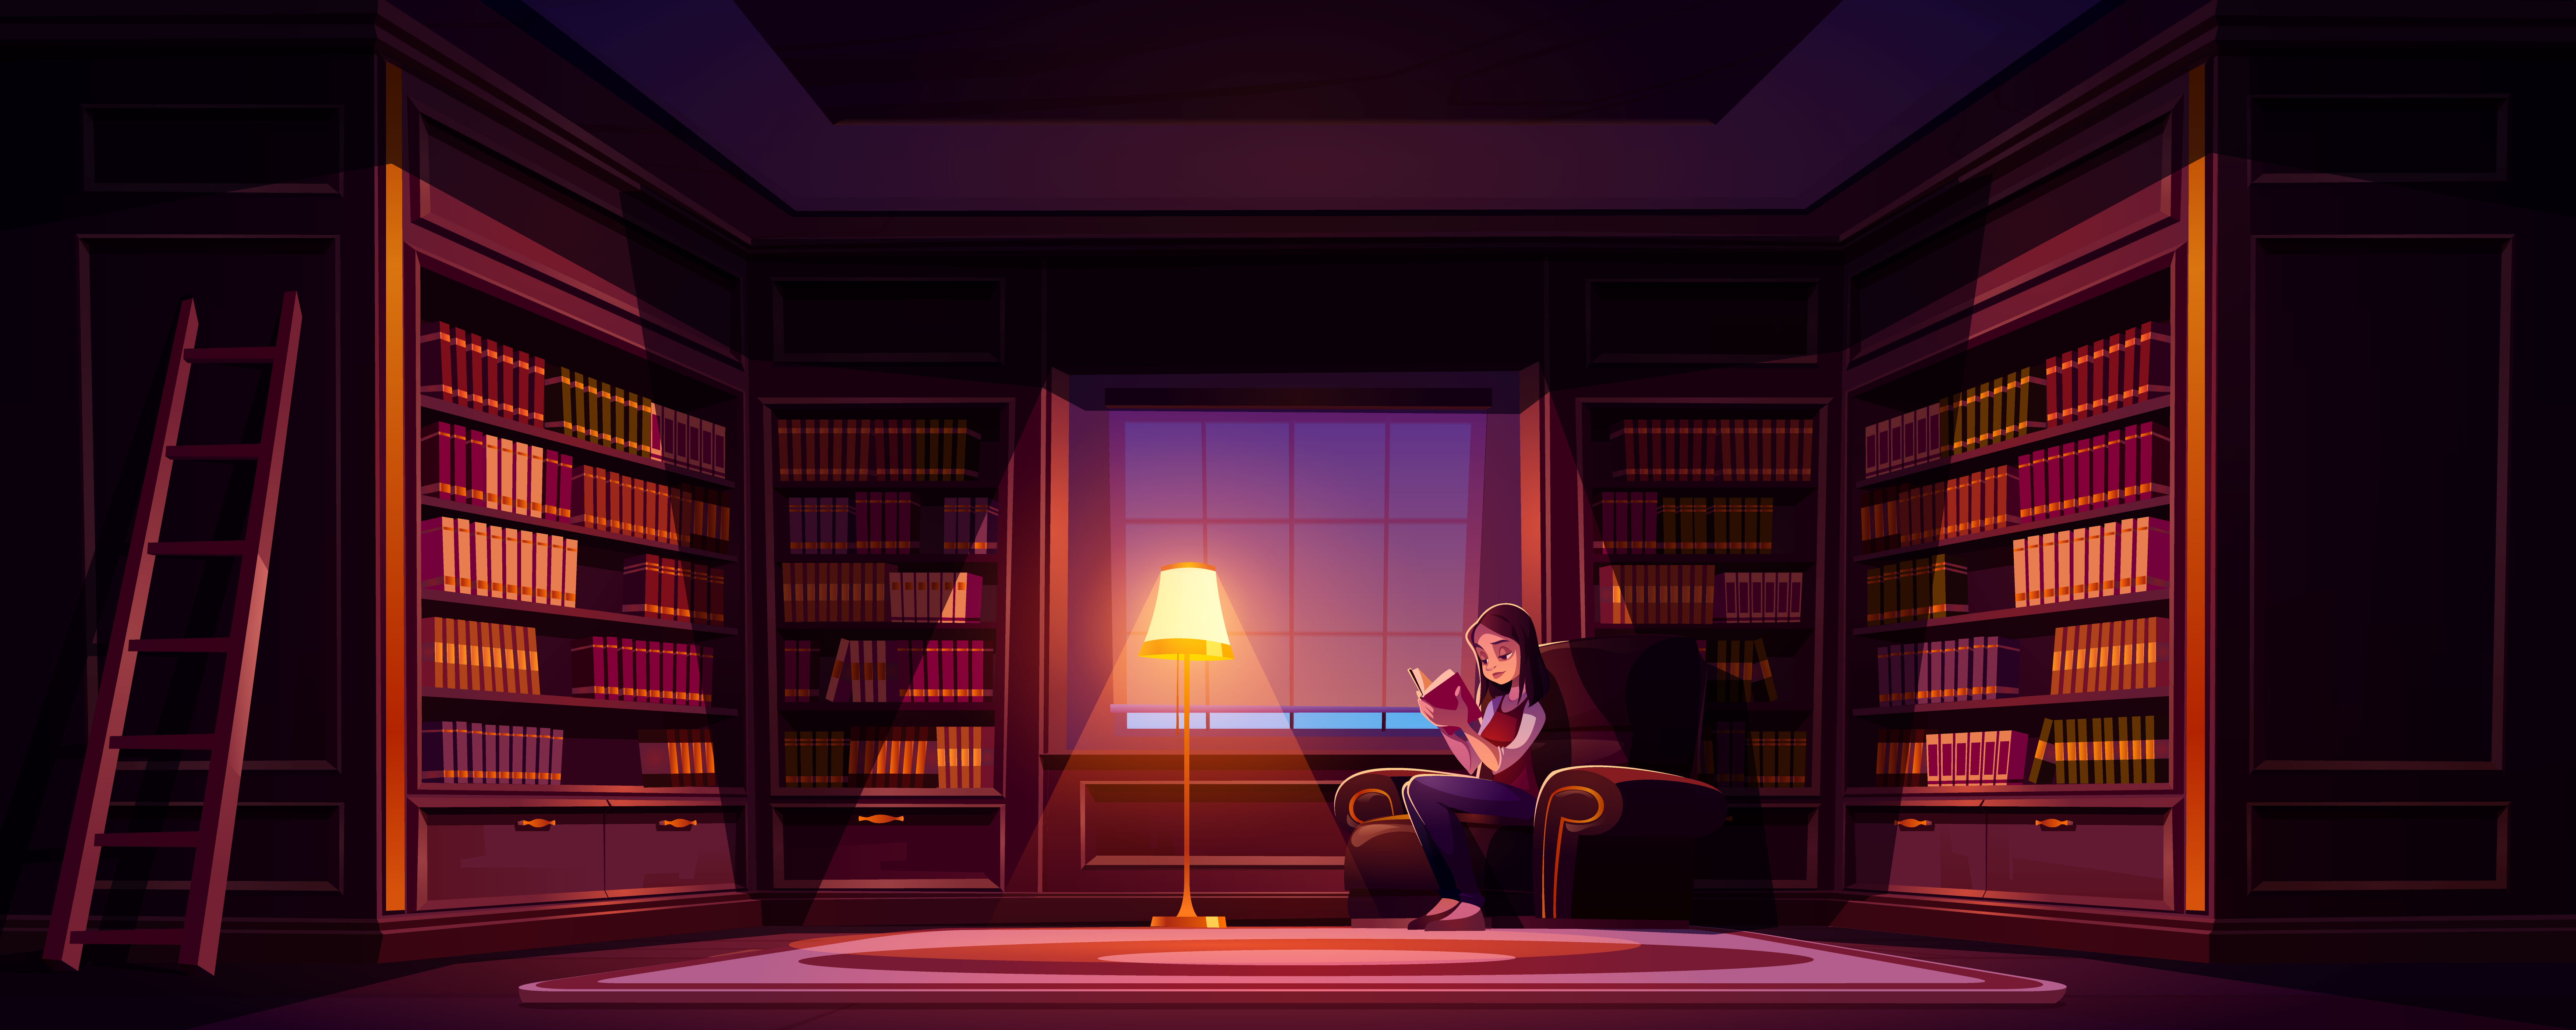 Woman reading in a book room